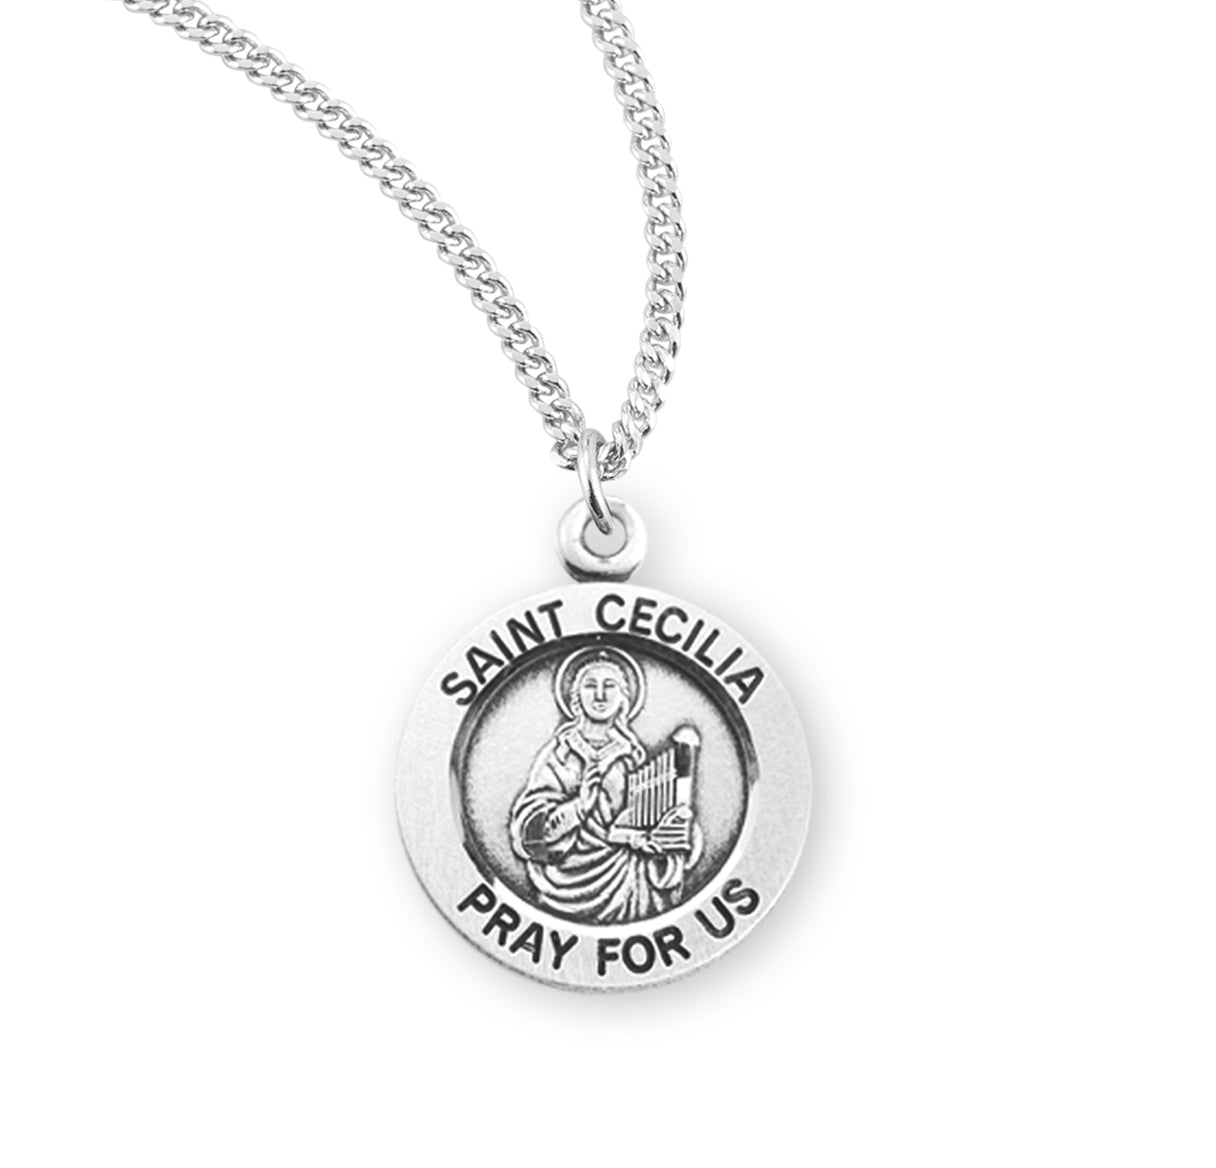 Patron Saint Cecilia Round Sterling Silver Medal